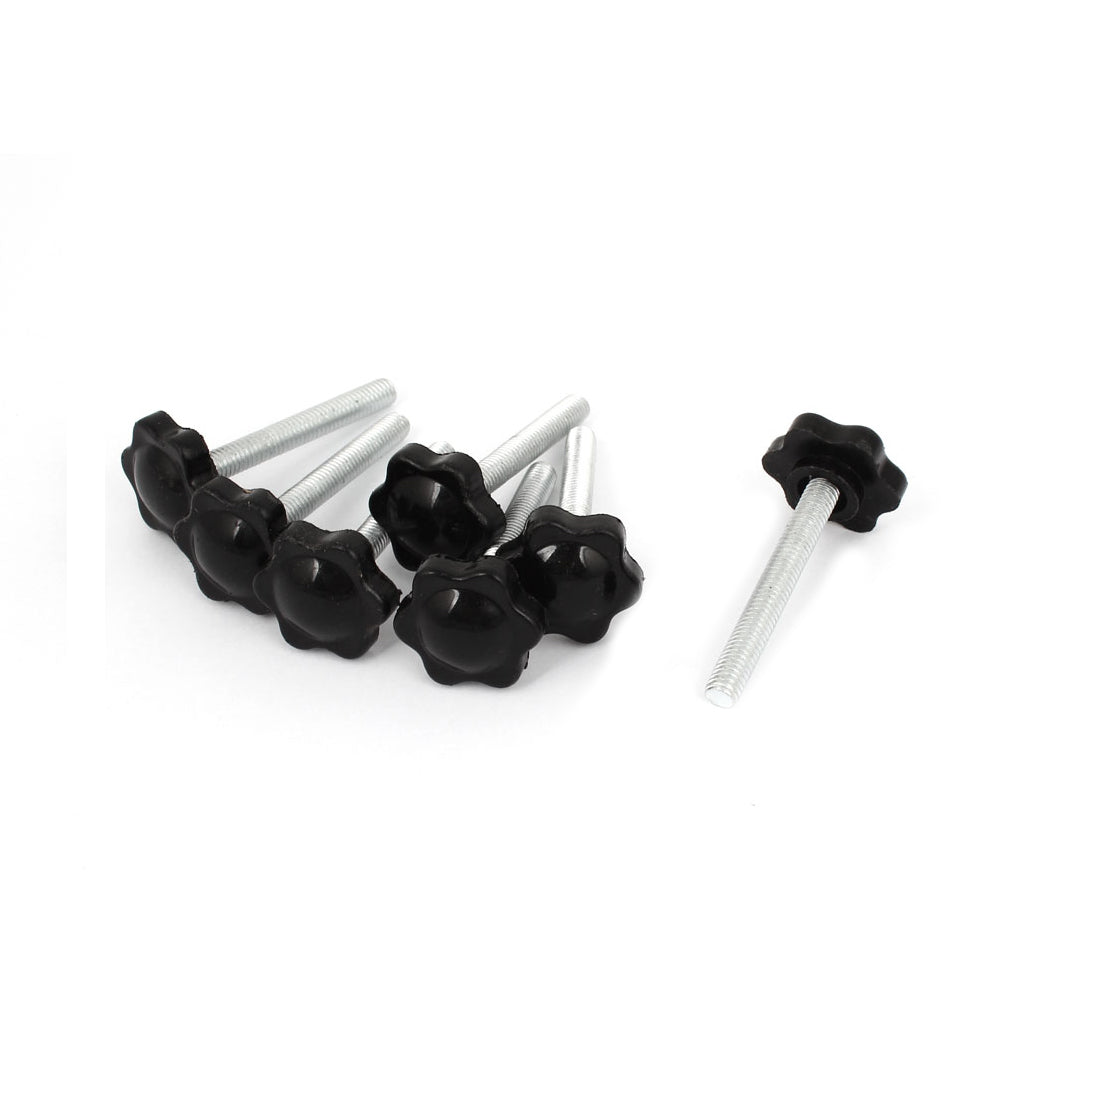 uxcell Uxcell 8 Pcs Black Spare Part M6 x 45mm Male Threaded Knurled Grip Star Knob